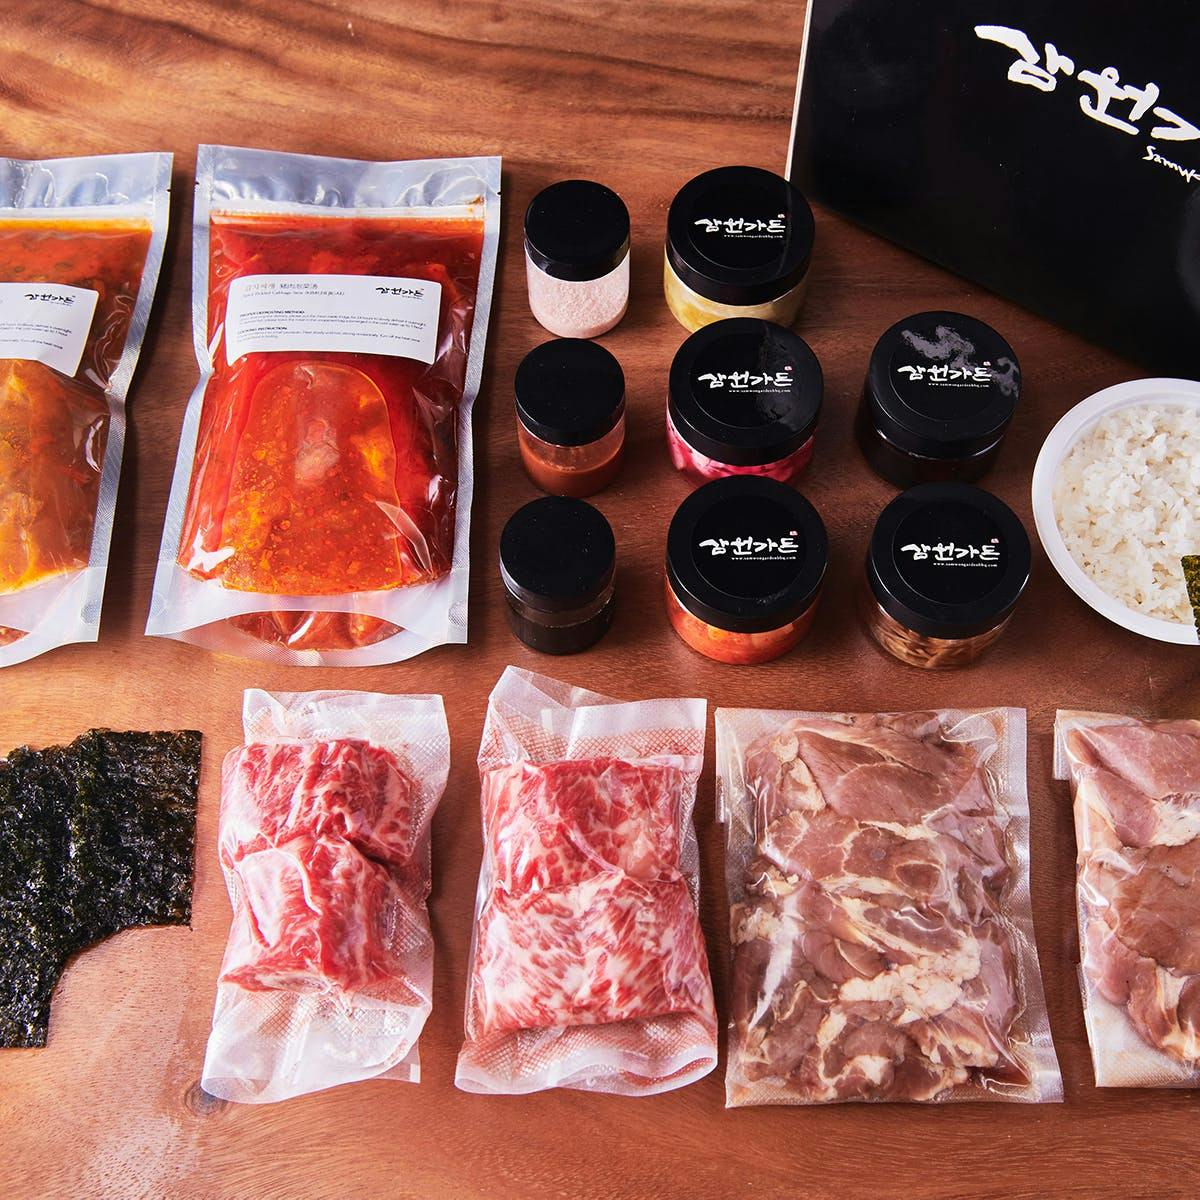 Korean BBQ Kit for 4-6 - Choose Your Own Chris Oh’s Korean BBQ Kit89% love  this shop89% of customers love this!The Customer Love Score represents the